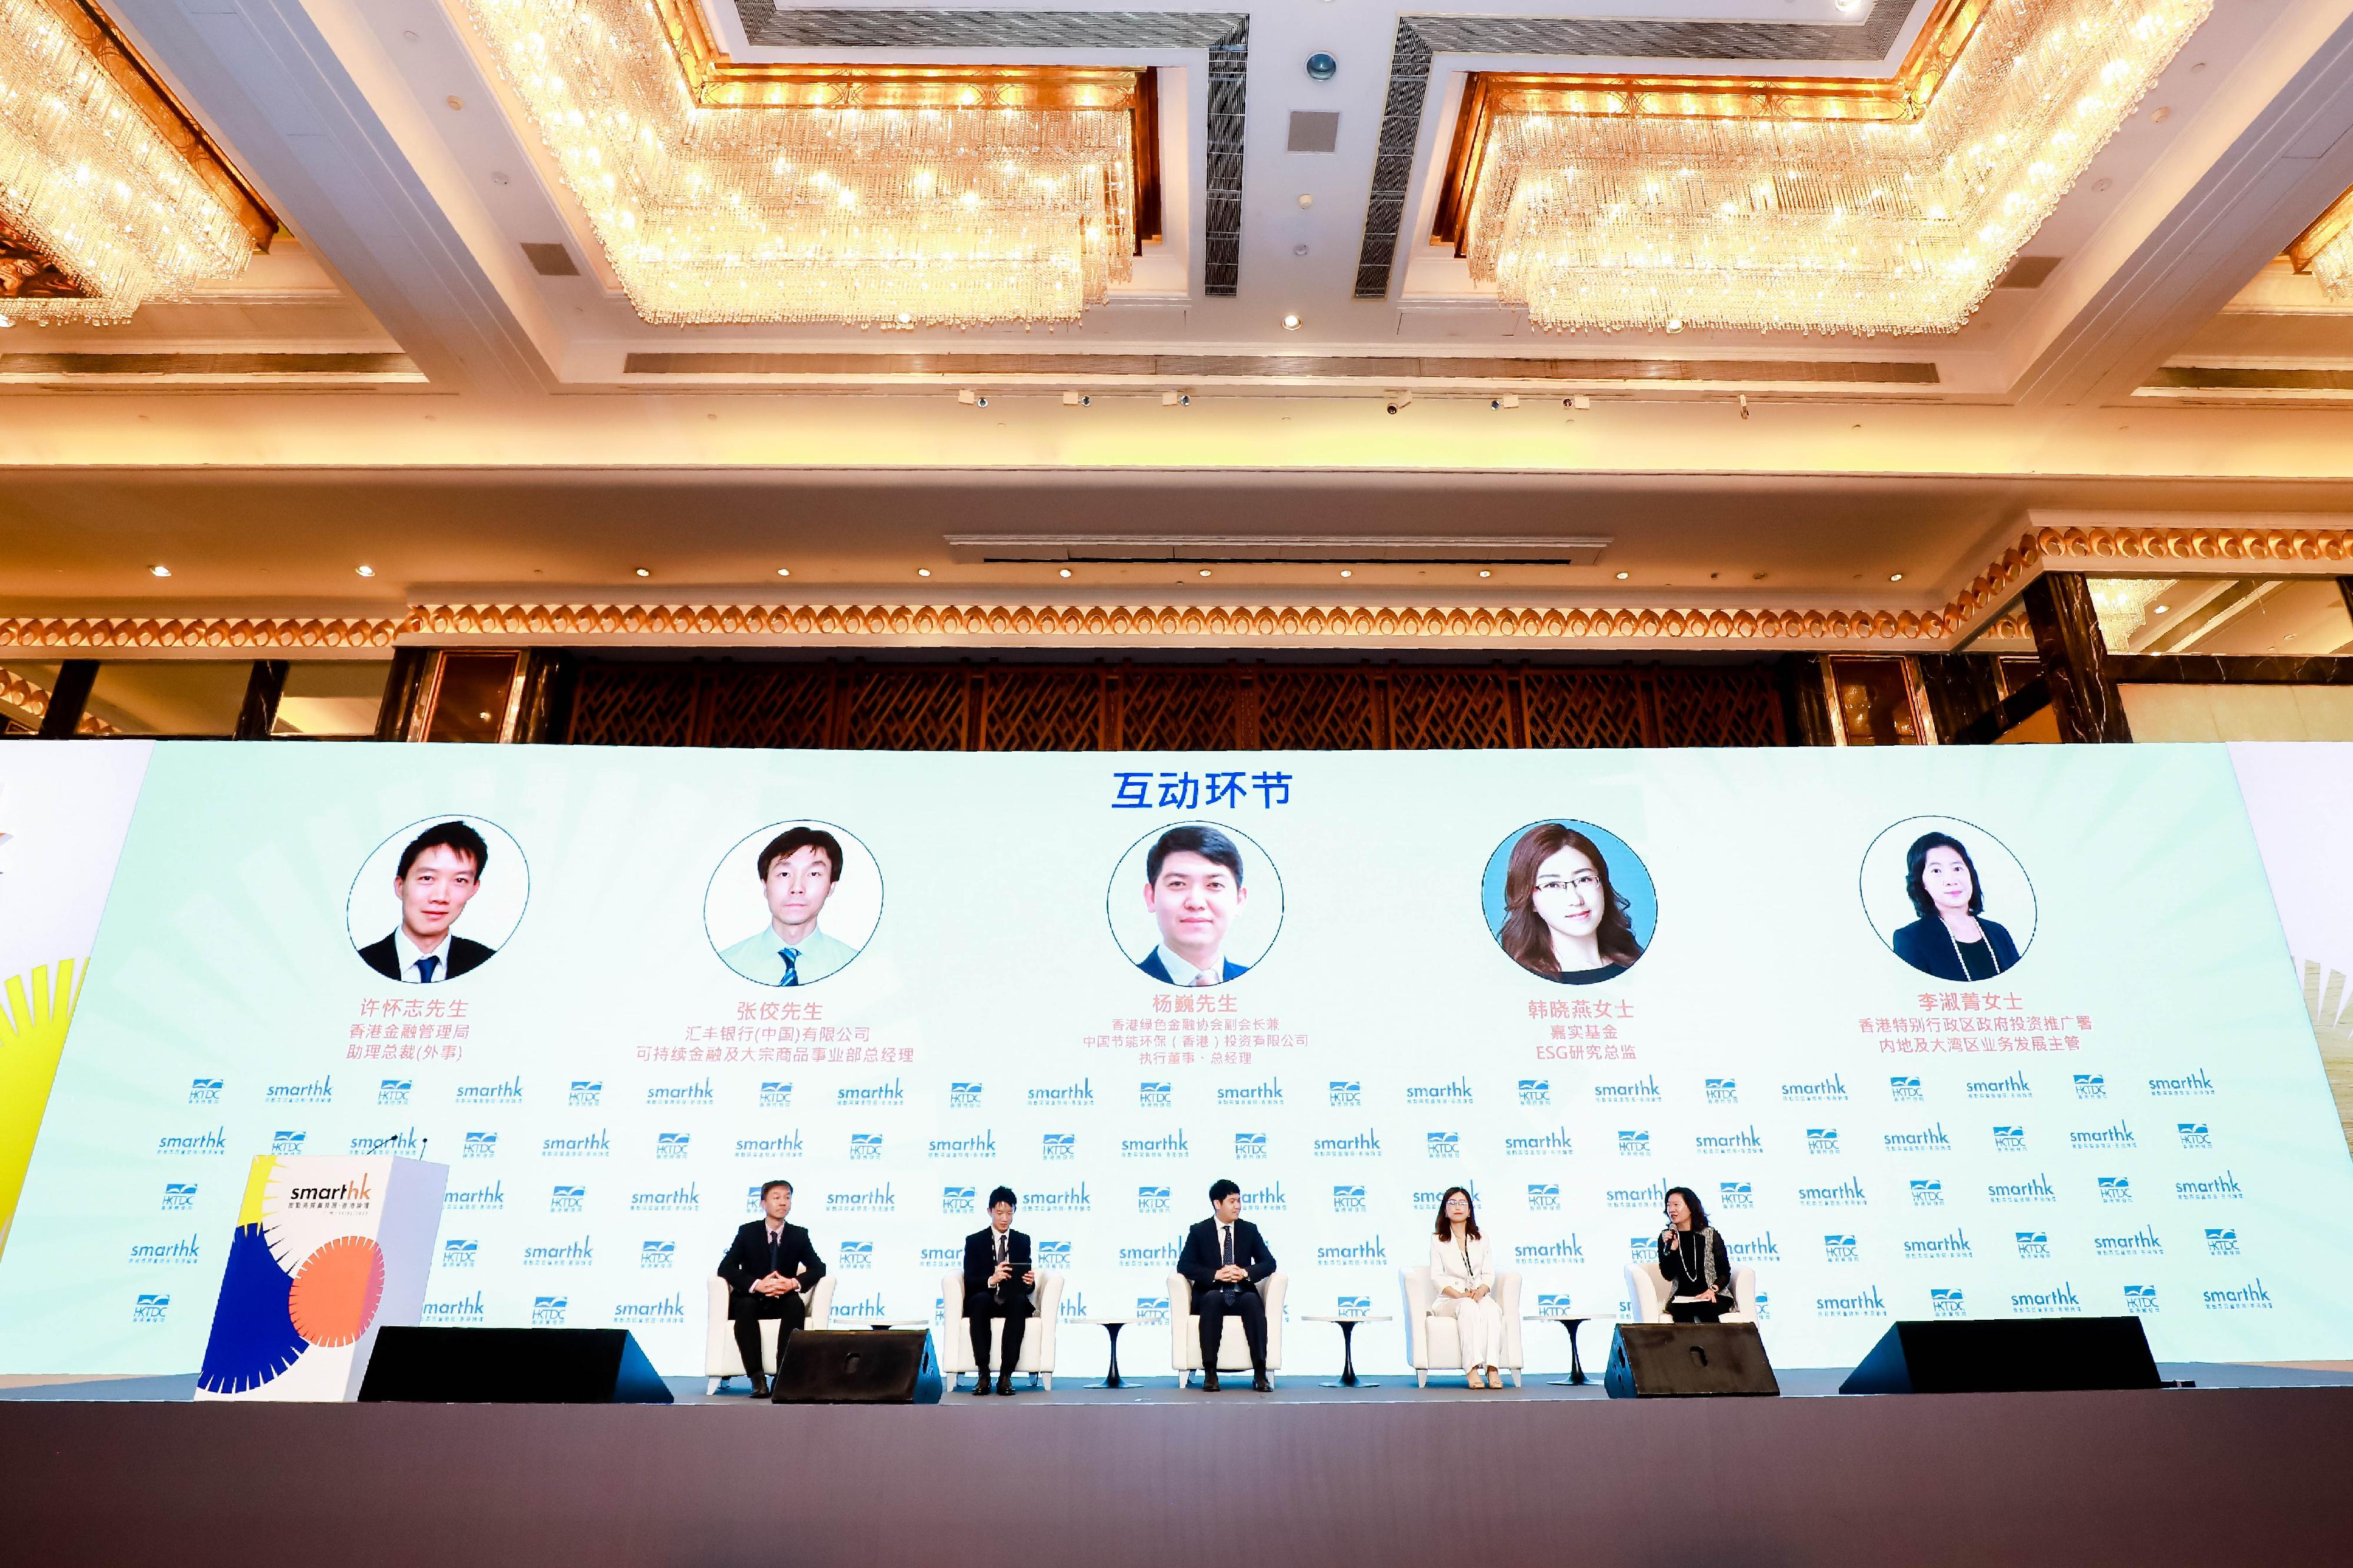 Invest Hong Kong (InvestHK) co-hosted a financial forum as part of the SmartHK Promoting High Quality Development‧Hong Kong Forum, which kicked off in Guangzhou today (May 24), updating potential investors from the Guangdong-Hong Kong-Macao Greater Bay Area (GBA) cities about the latest high-end and high value-added financial services in Hong Kong and encouraging them to leverage Hong Kong's business advantages to go global. Photo shows the Head of Mainland and GBA Business Development of InvestHK, Ms Loretta Lee (first right), hosting a panel session at the forum with speakers including the Country Head of Sustainable Finance and Commodities, Commercial Banking, HSBC (China) Limited, Mr Daniel Zhang (first left); the Executive Director (External) of the Hong Kong Monetary Authority, Mr Kenneth Hui (second left); and Vice President of the Hong Kong Green Finance Association and Executive Director and General Manager of CECEP Hong Kong Investment Co Ltd, Mr Yang Wei (centre). The panelists discussed Hong Kong's latest developments and opportunities in green and sustainable finance; how the GBA can contribute to the Mainland's low-carbon economy plus other green financing opportunities in Hong Kong, the GBA and the Belt and Road Initiative. The Head of ESG Research, Harvest Fund Management, Ms Katherine Han (second right), also updated the audience on how ESG-focused investors help corporate clients to drive corporate sustainable development and high-quality growth.